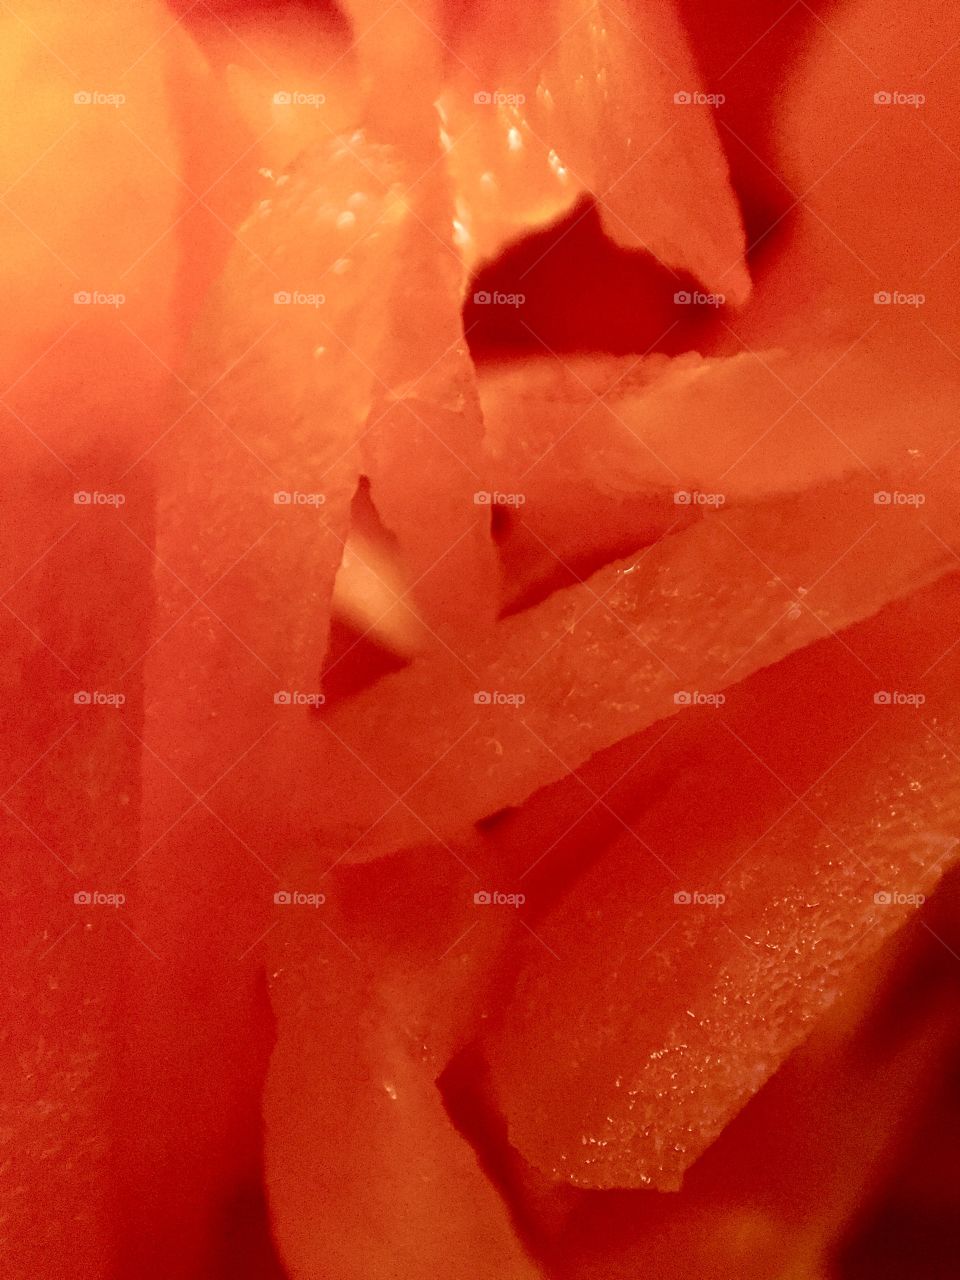 Chopped carrot up close